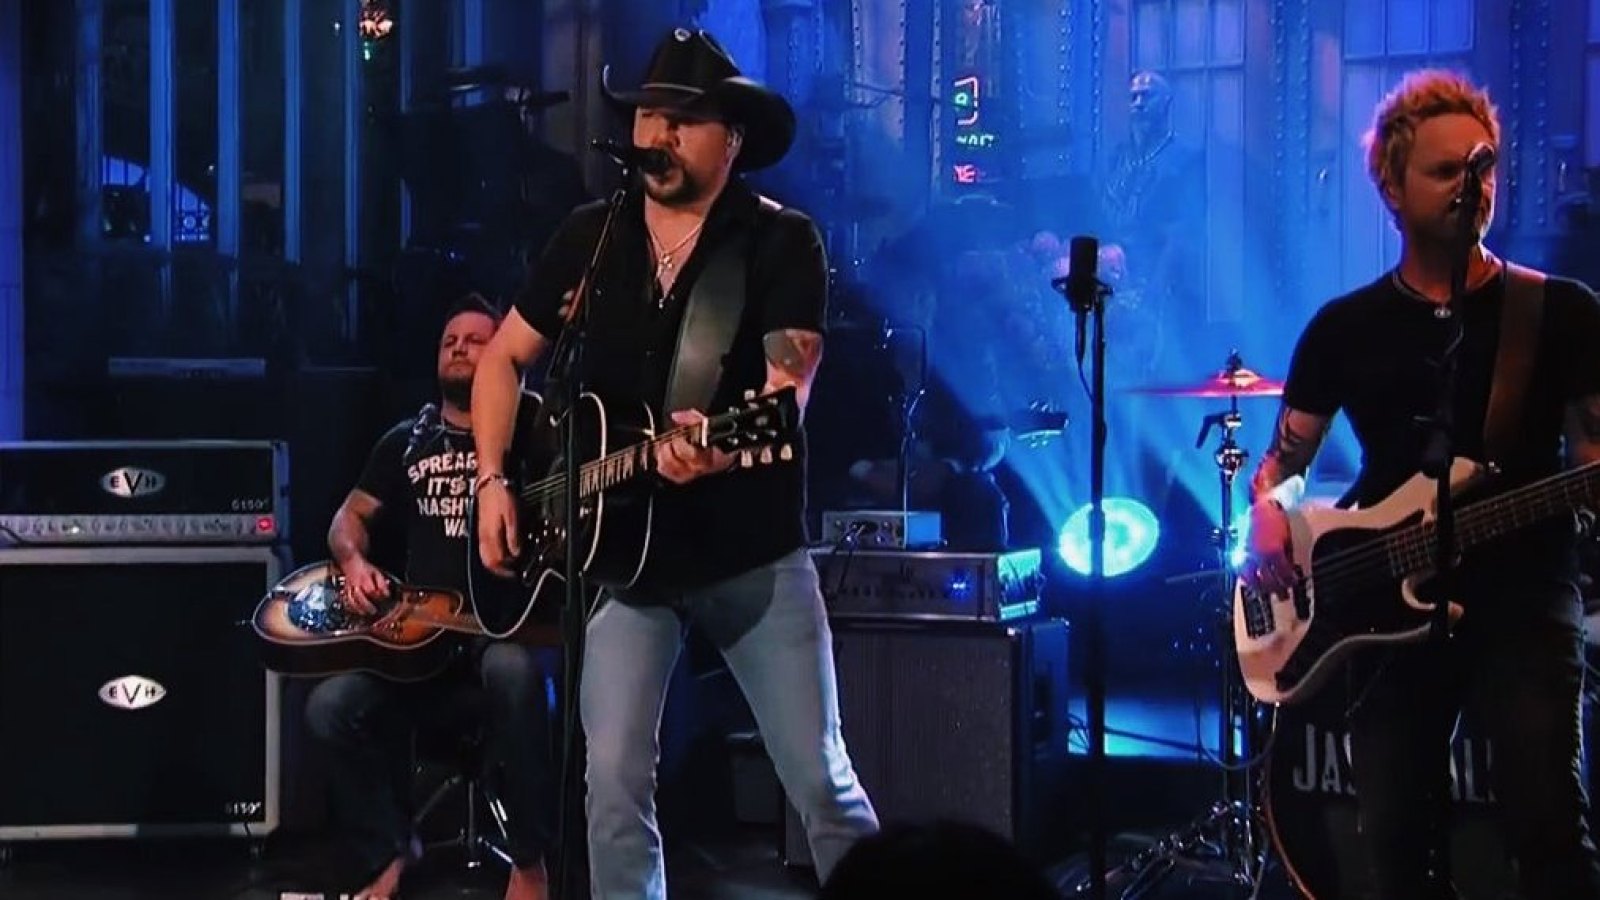 Jason Aldean Pays Tribute to Vegas Victims, Tom Petty on ‘SNL’